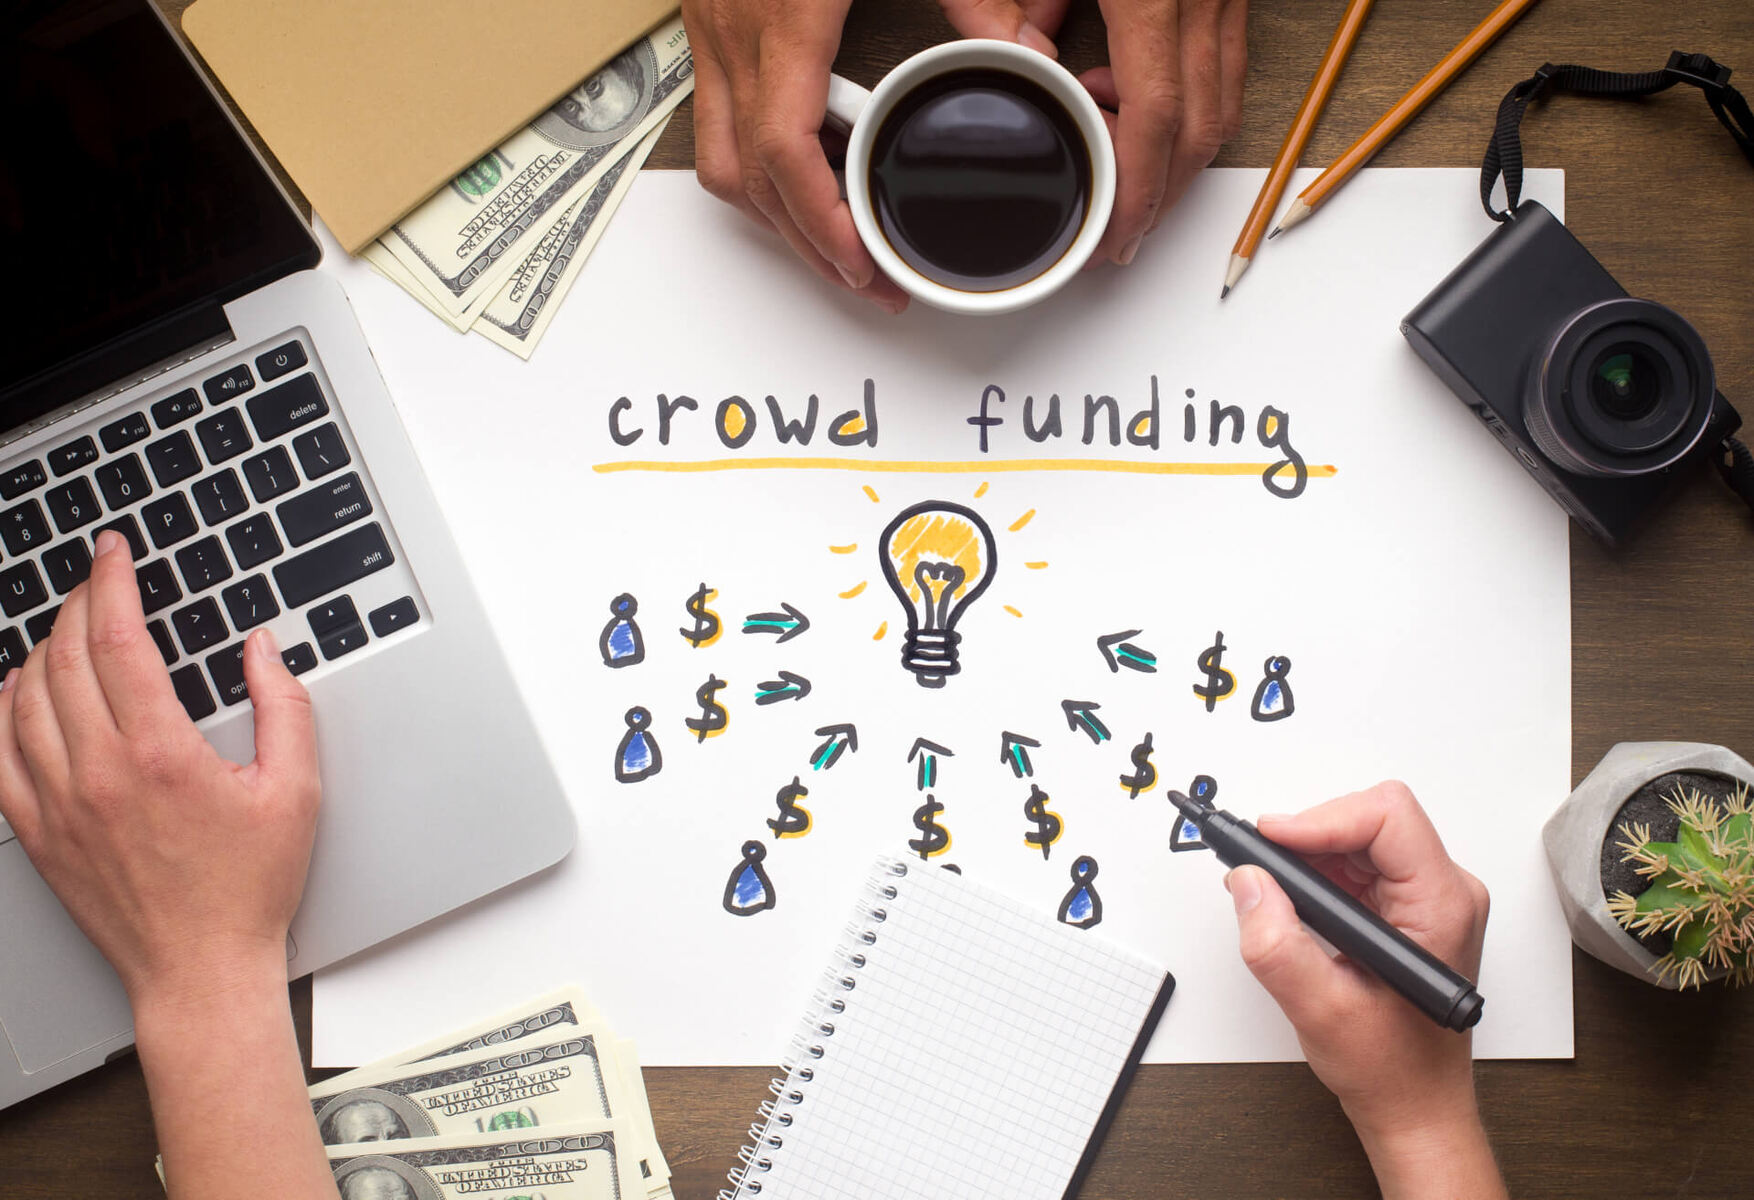 What’s The Average Amount Raised During Crowdfunding Campaigns?